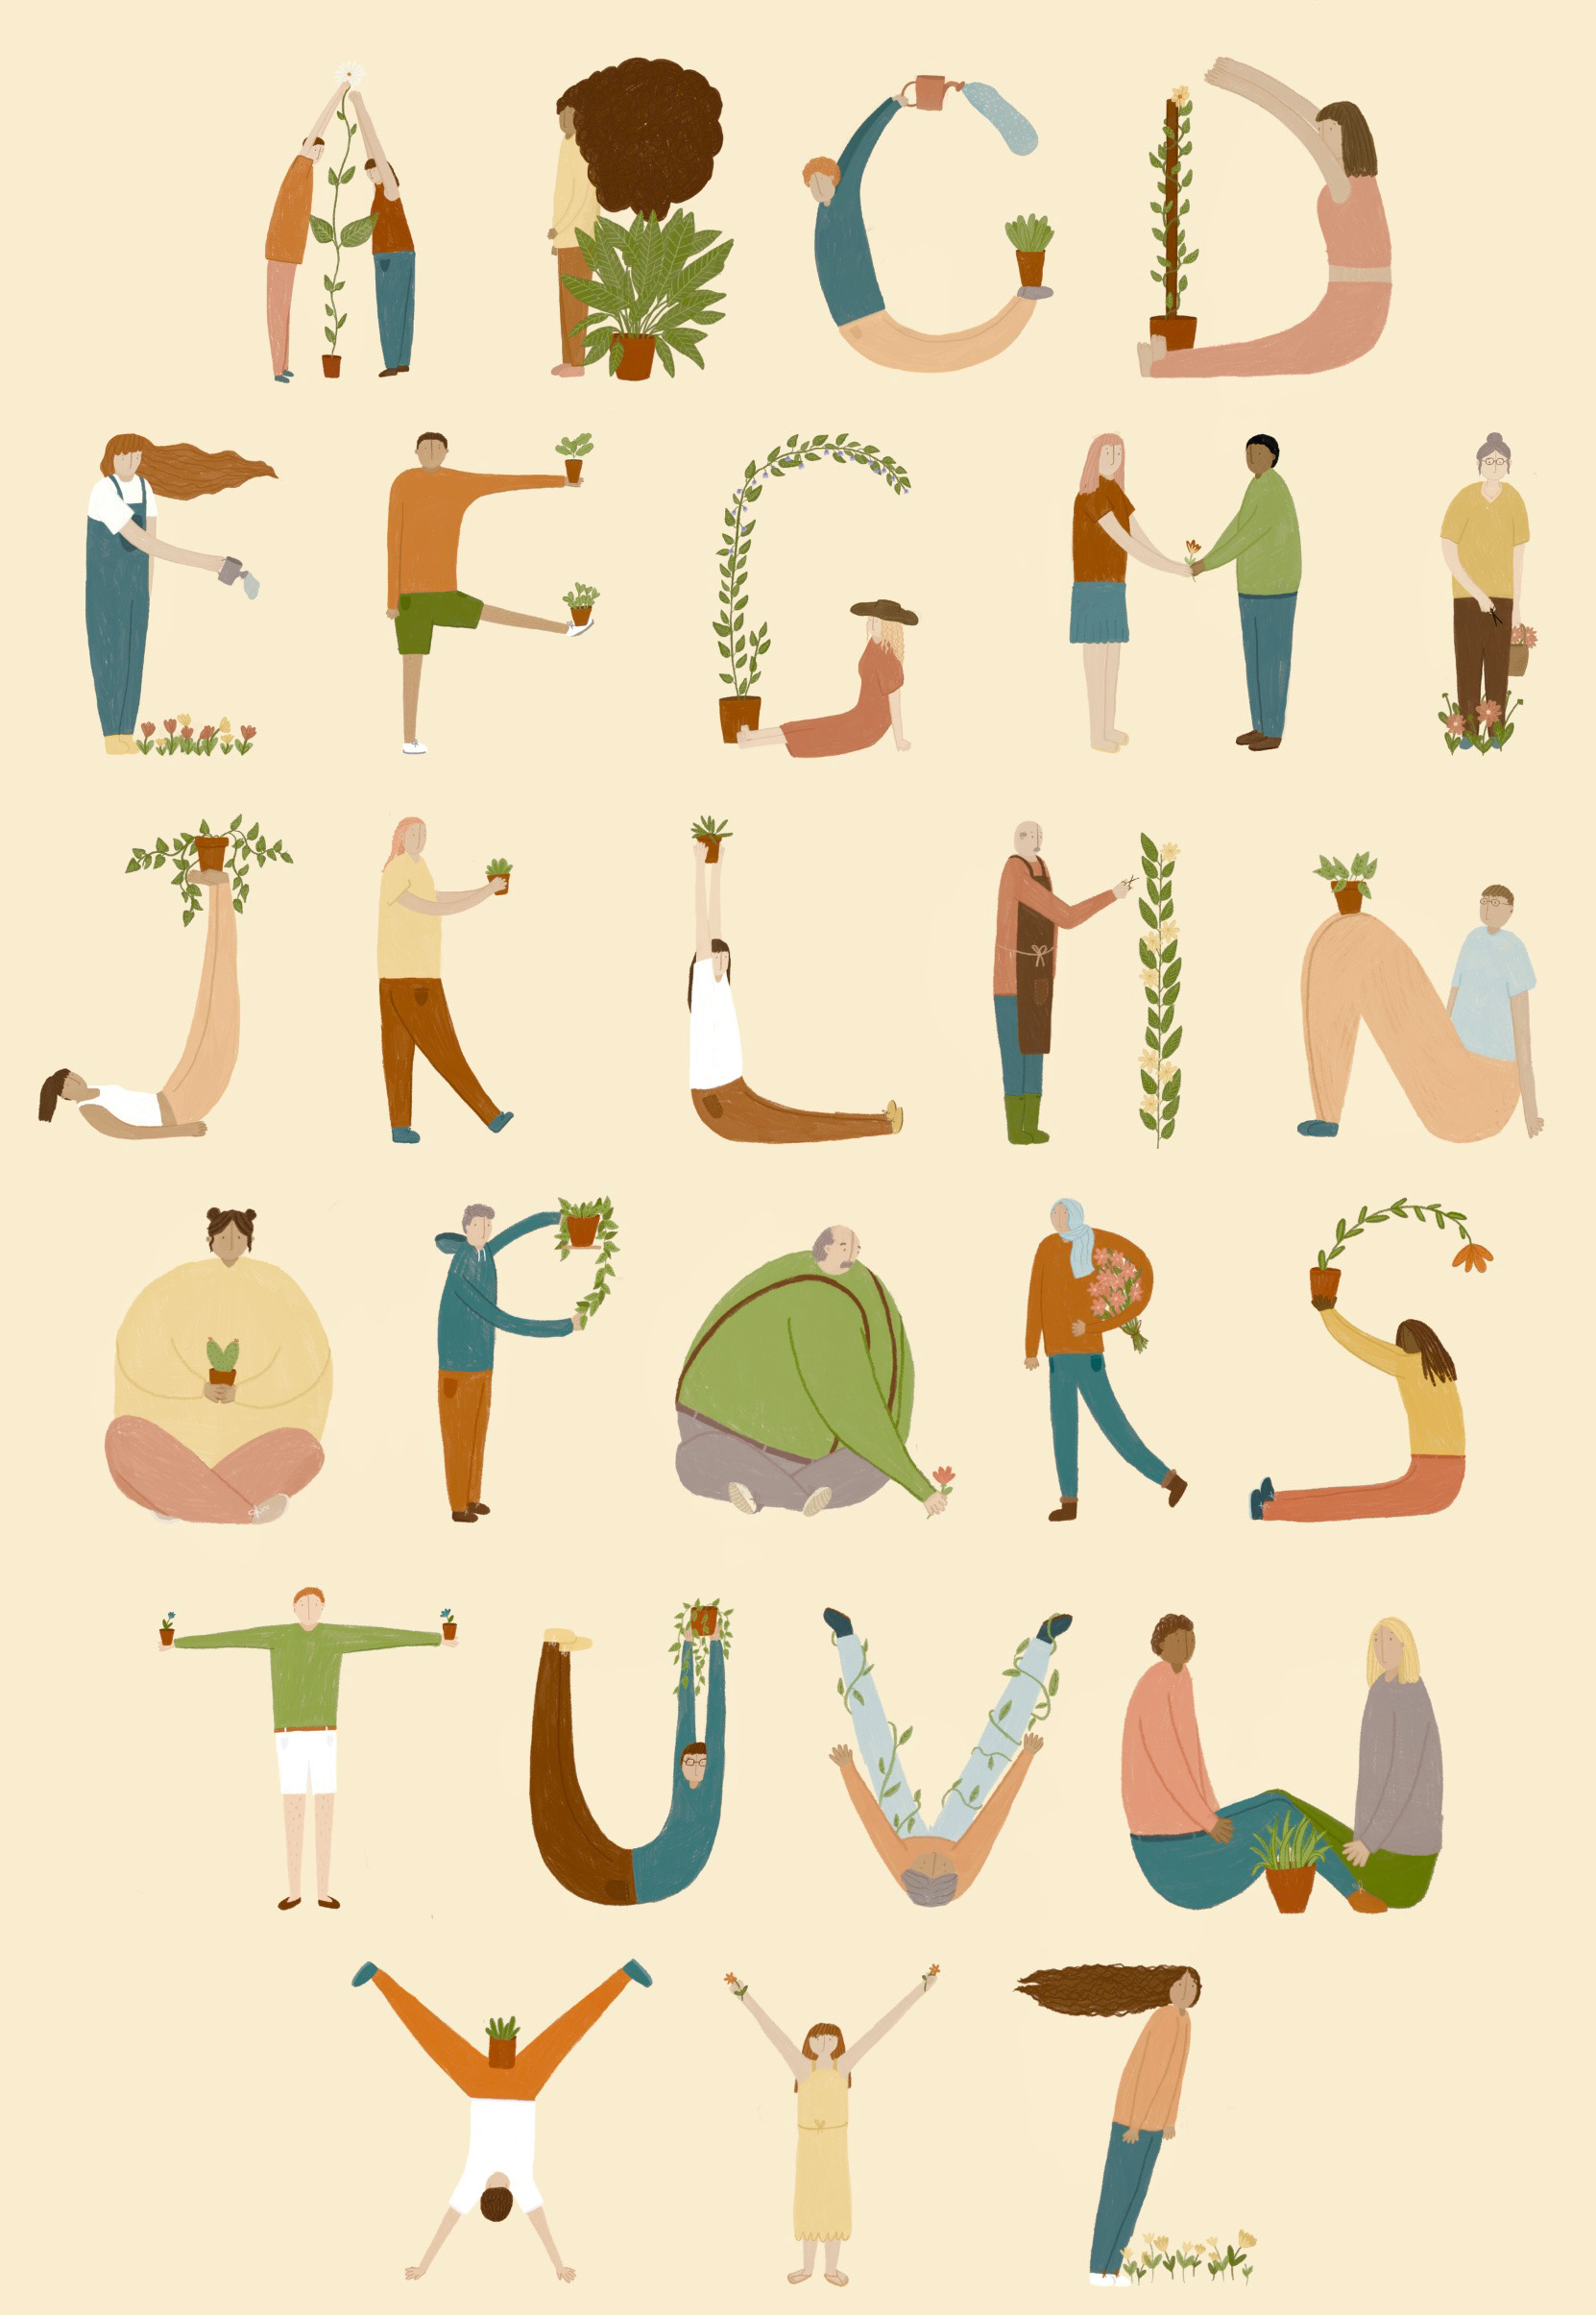 An A-Z of humans in letter shapes, doing plant related activities by Lauren Gorbould